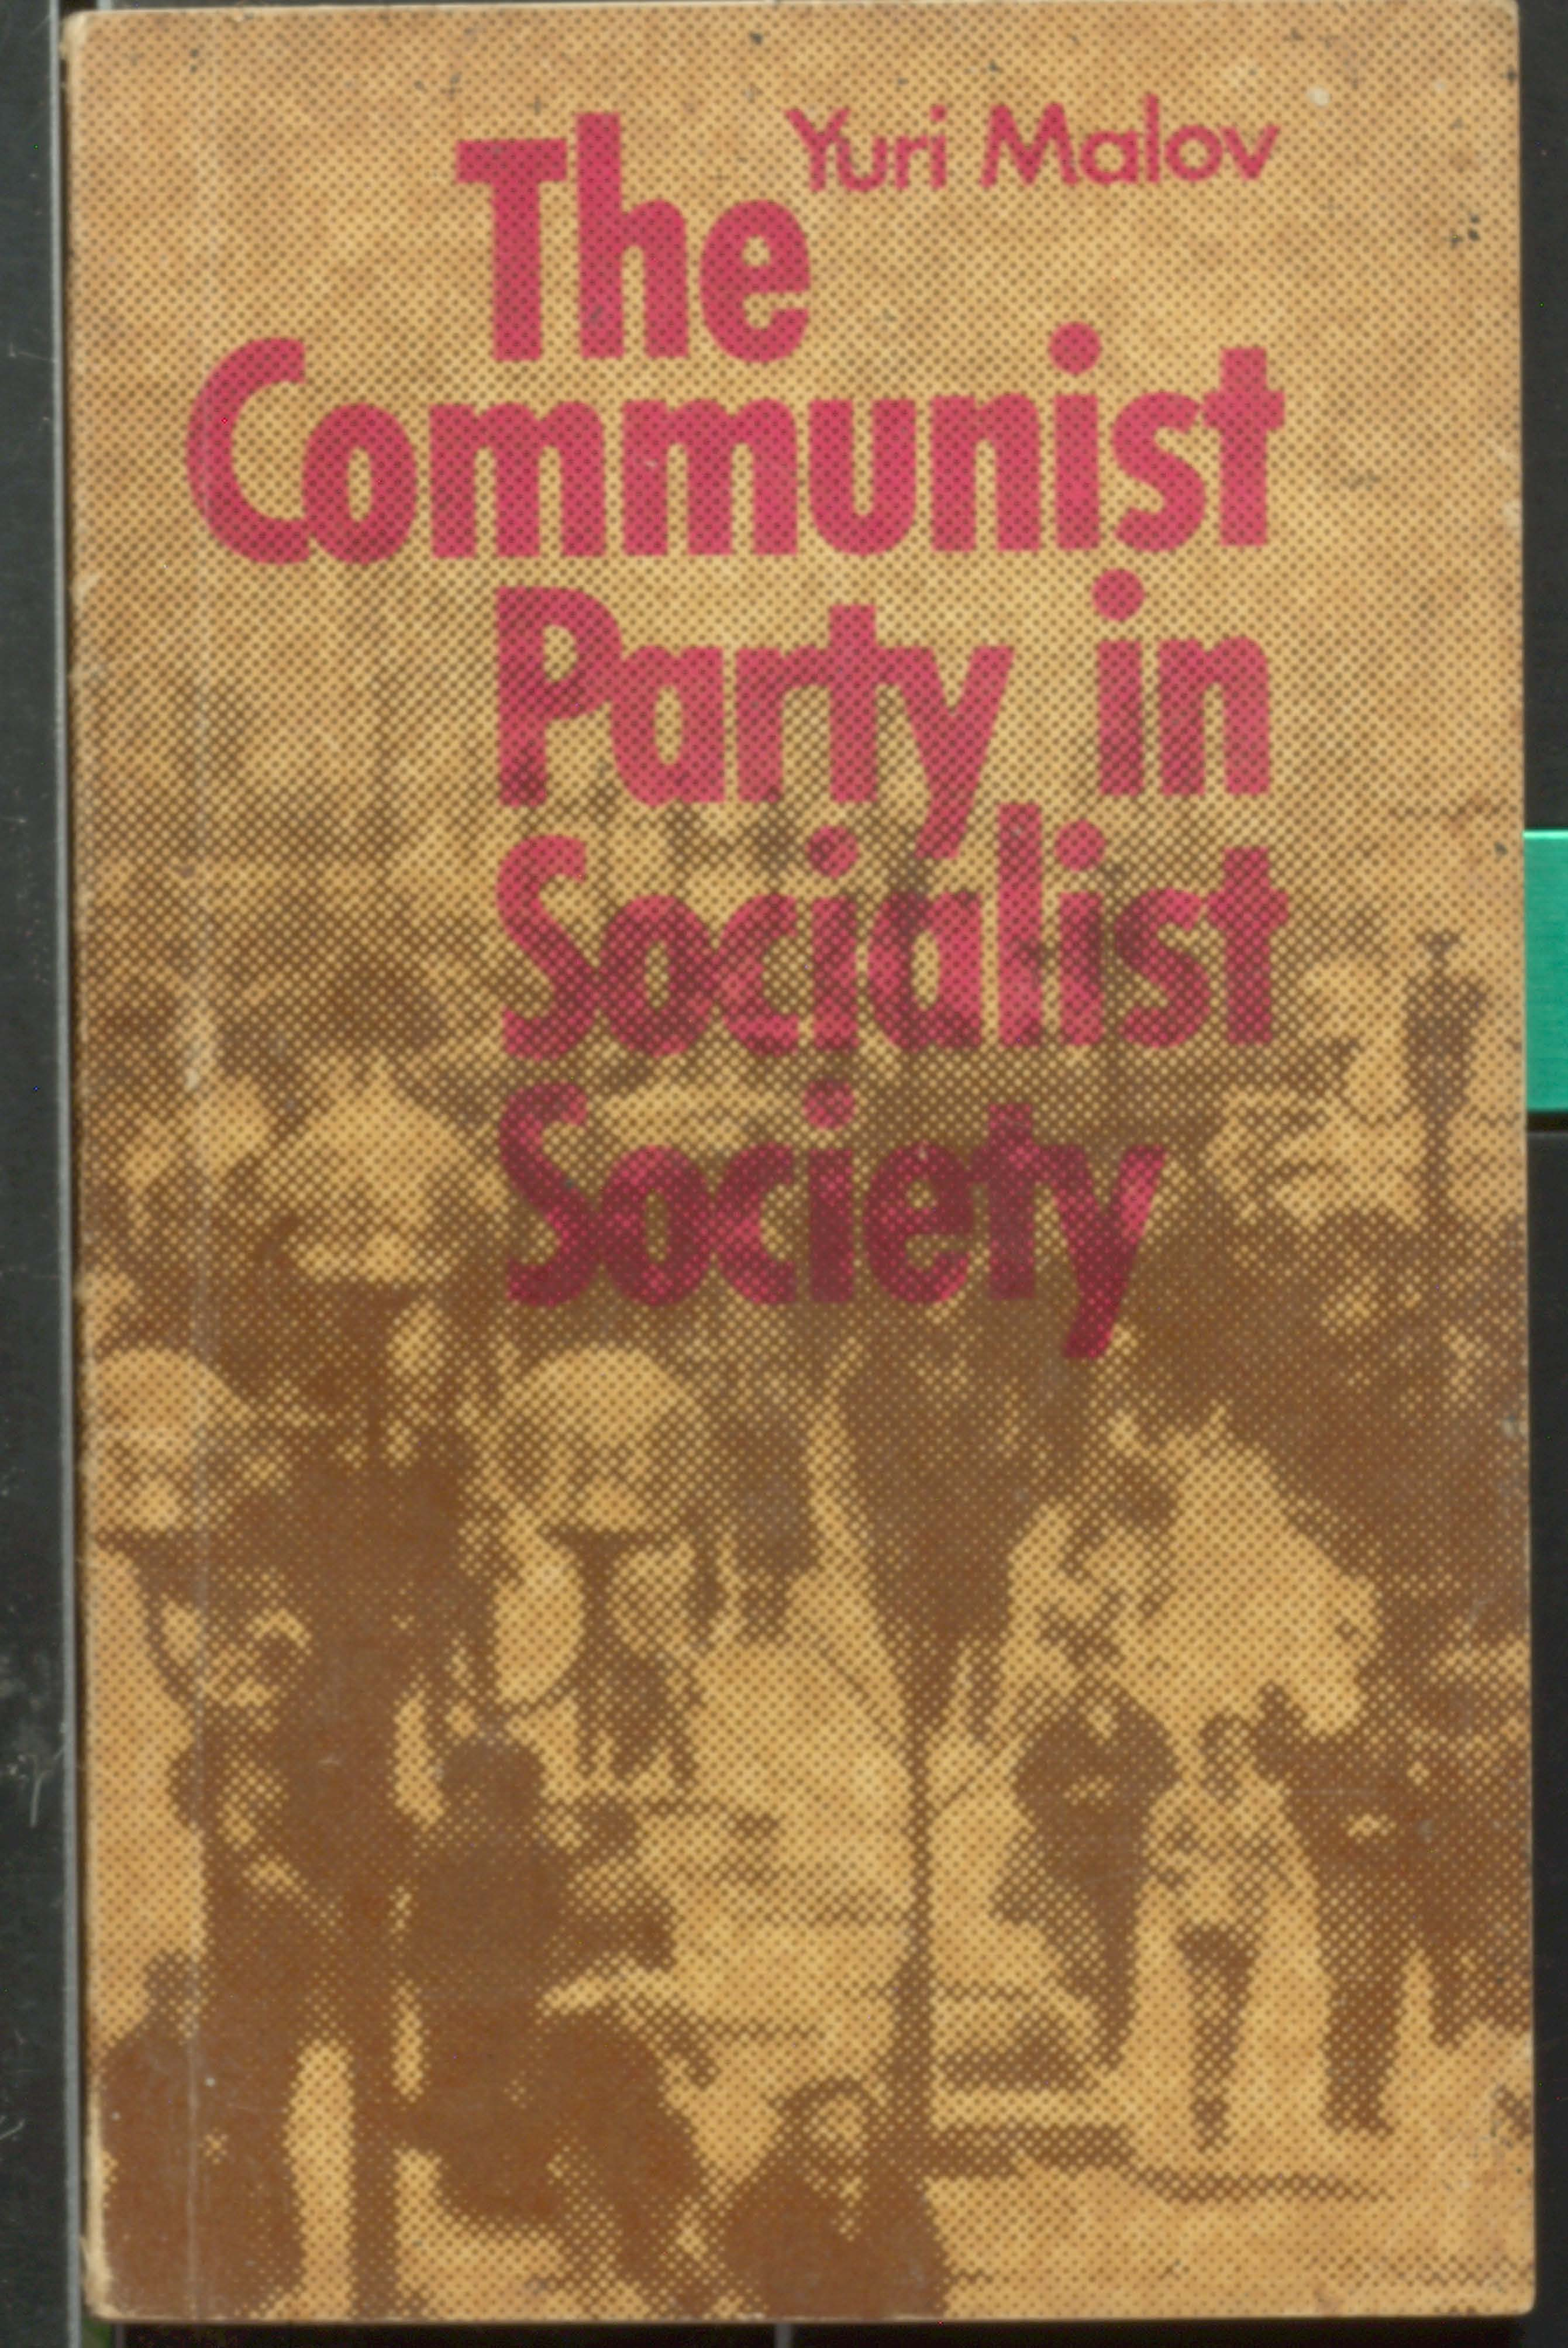 The Communist Party in Socialist Society